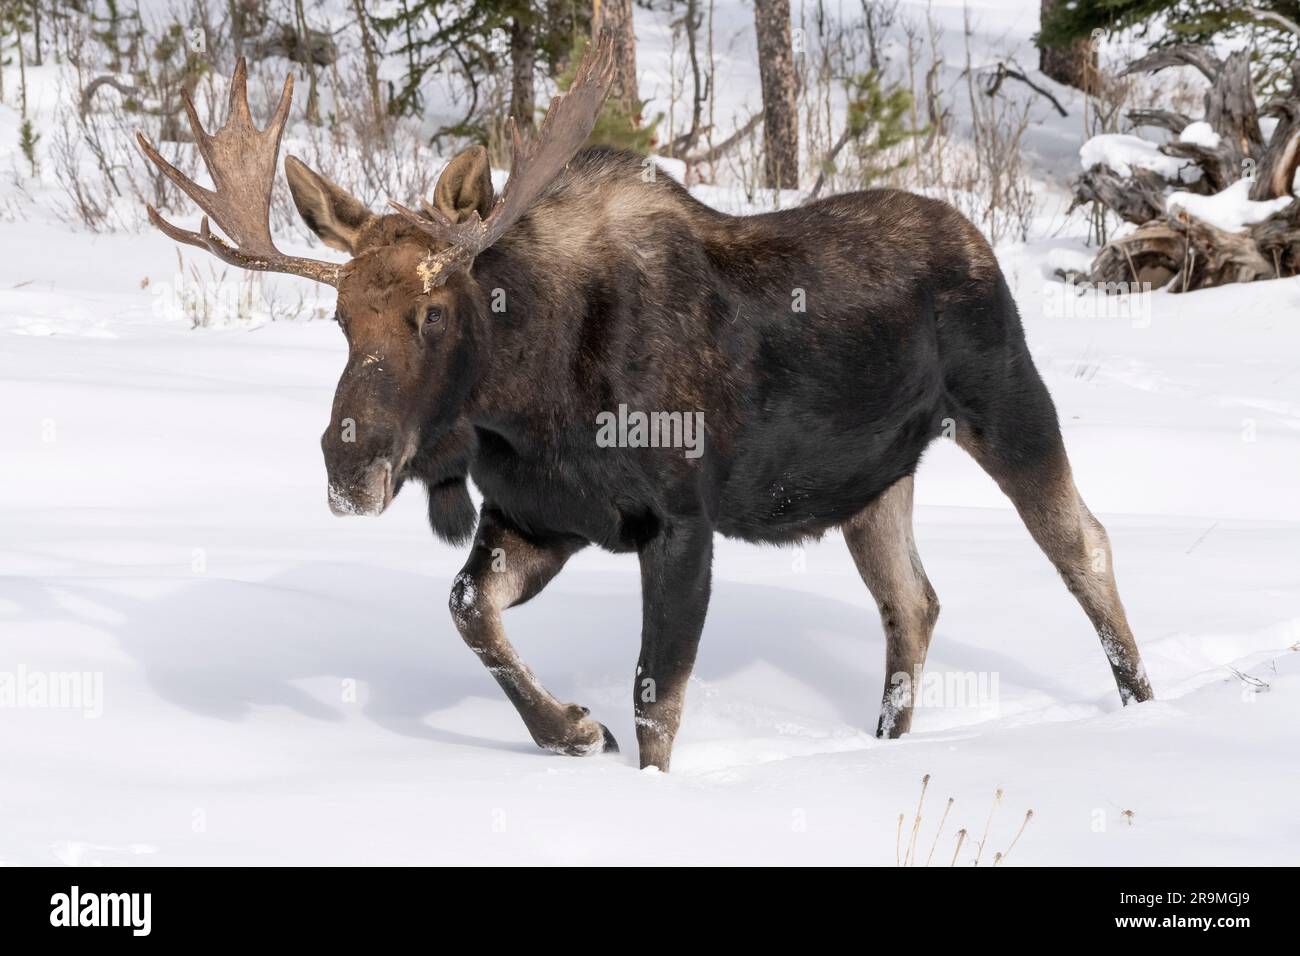 Moose, Bull, Winter, Yellowstone, Wyoming Banque D'Images